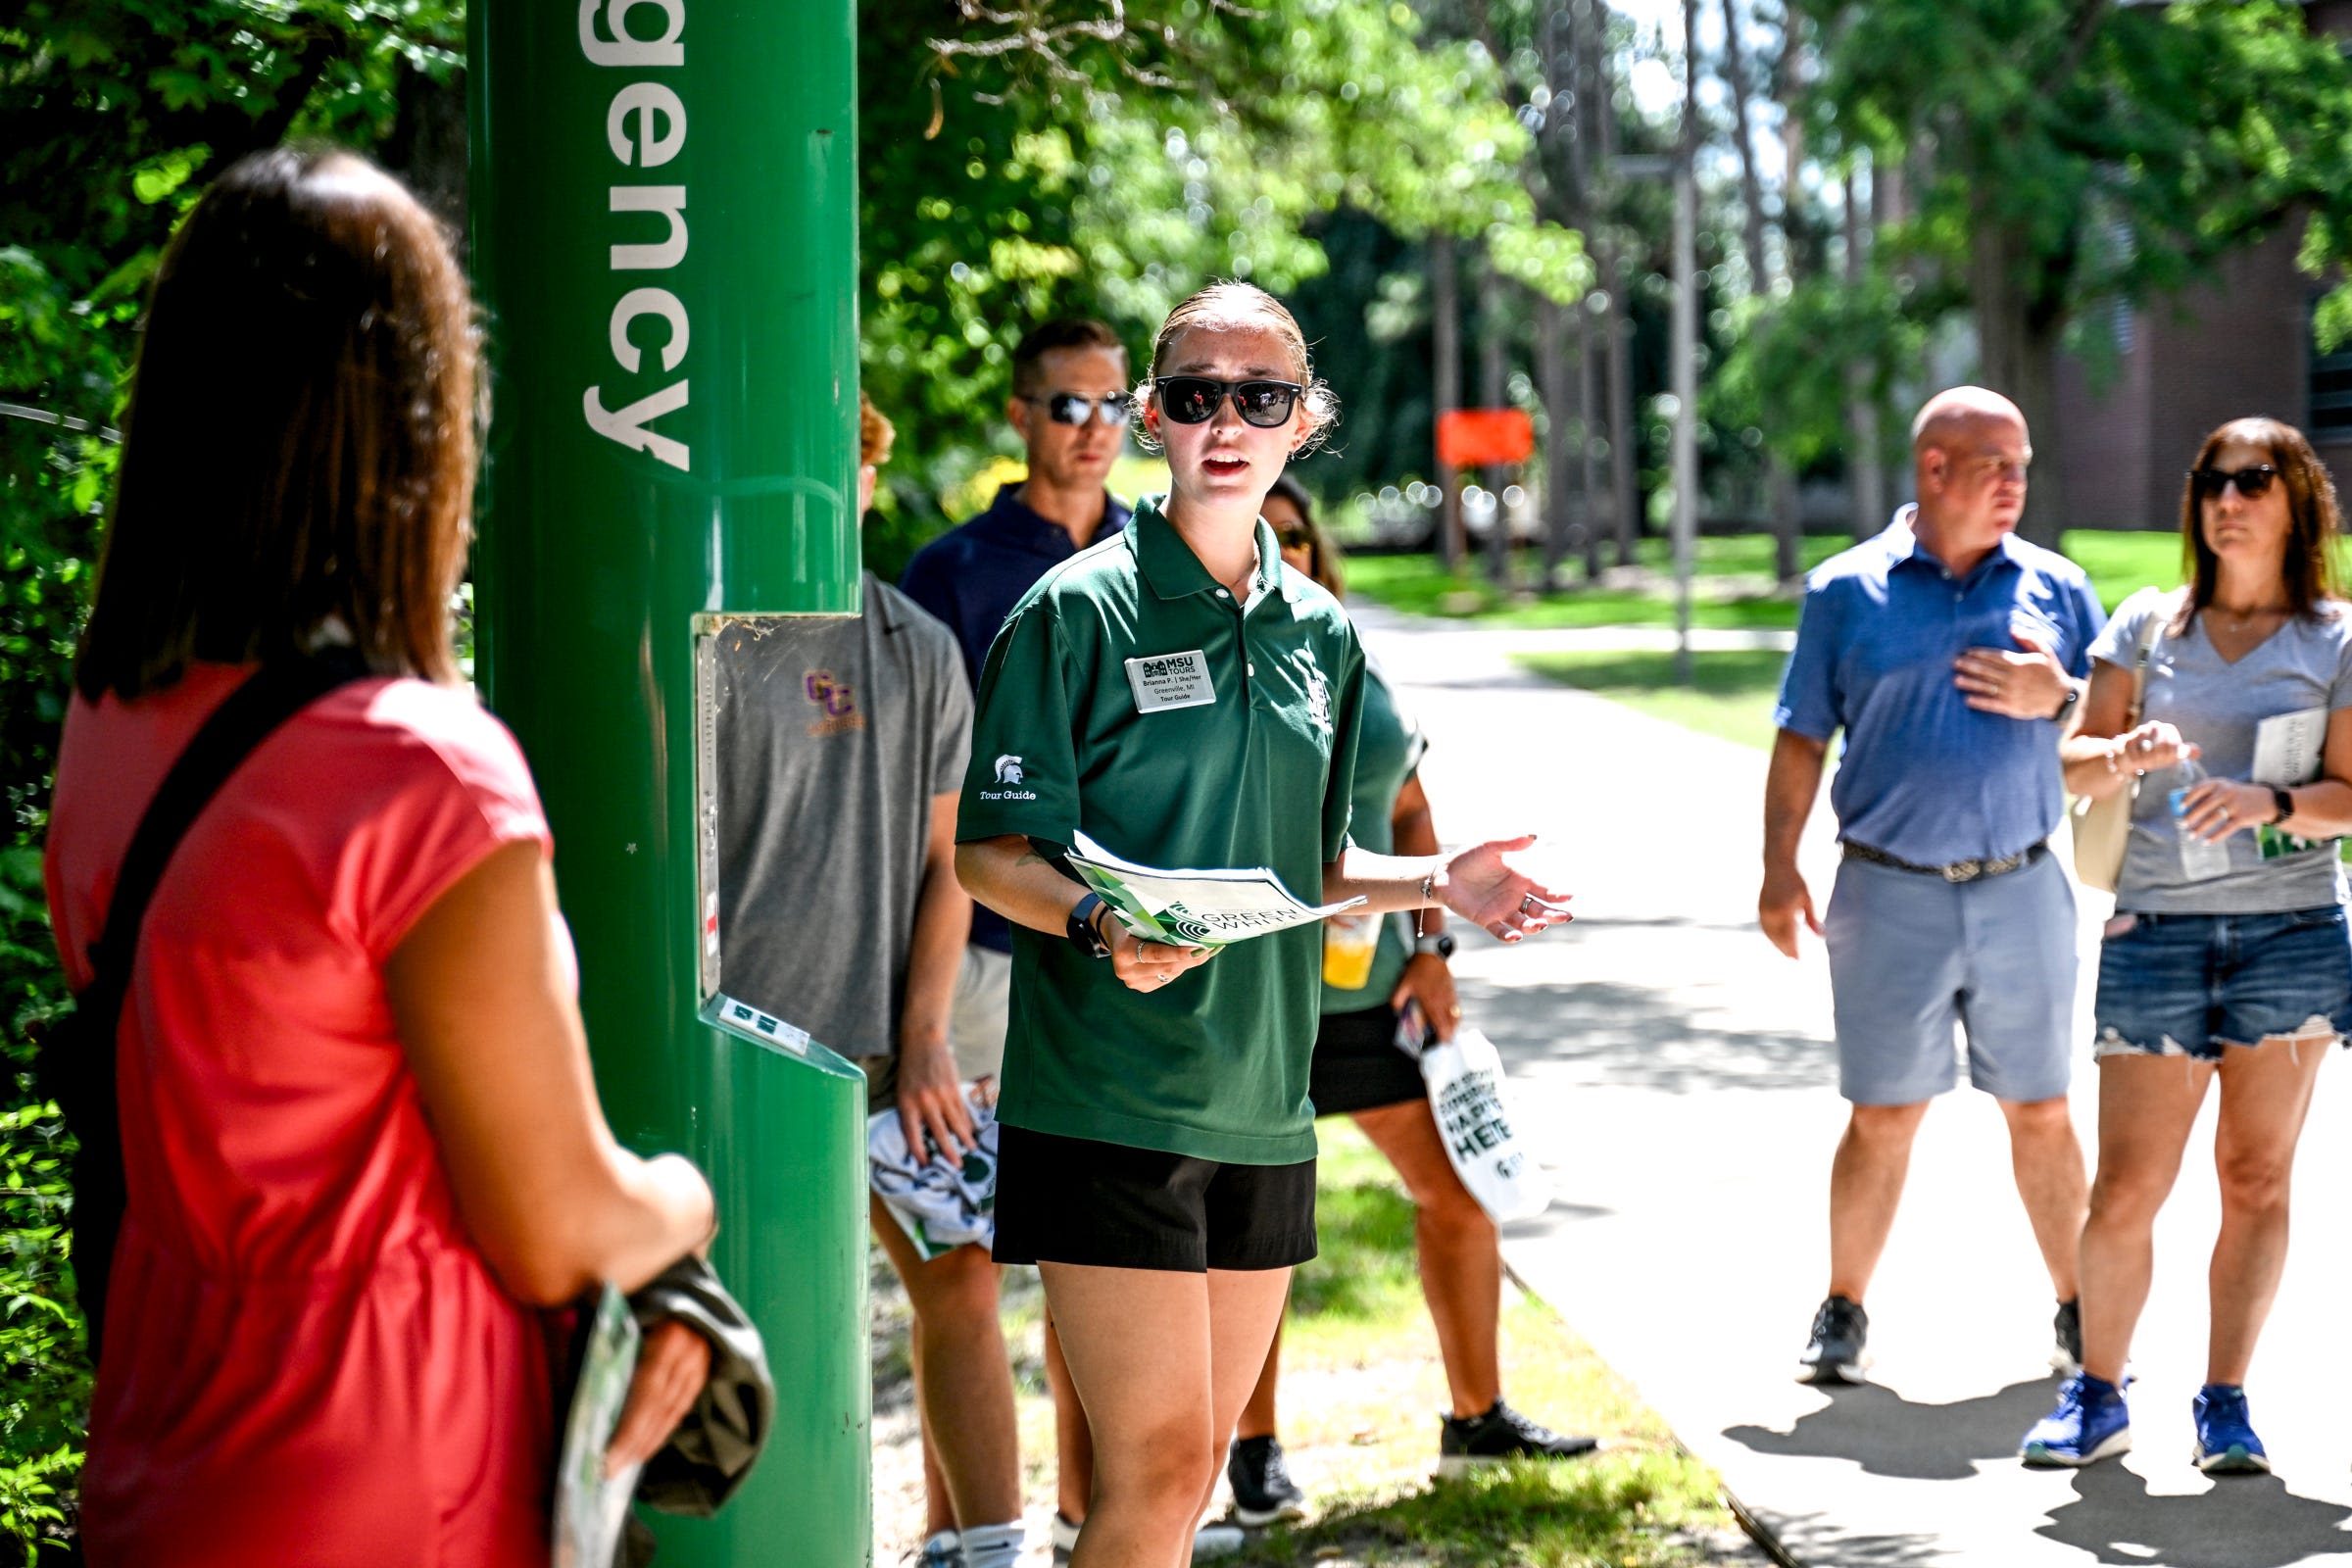 'I can see myself here:' Green and White Day allows prospective students to explore MSU